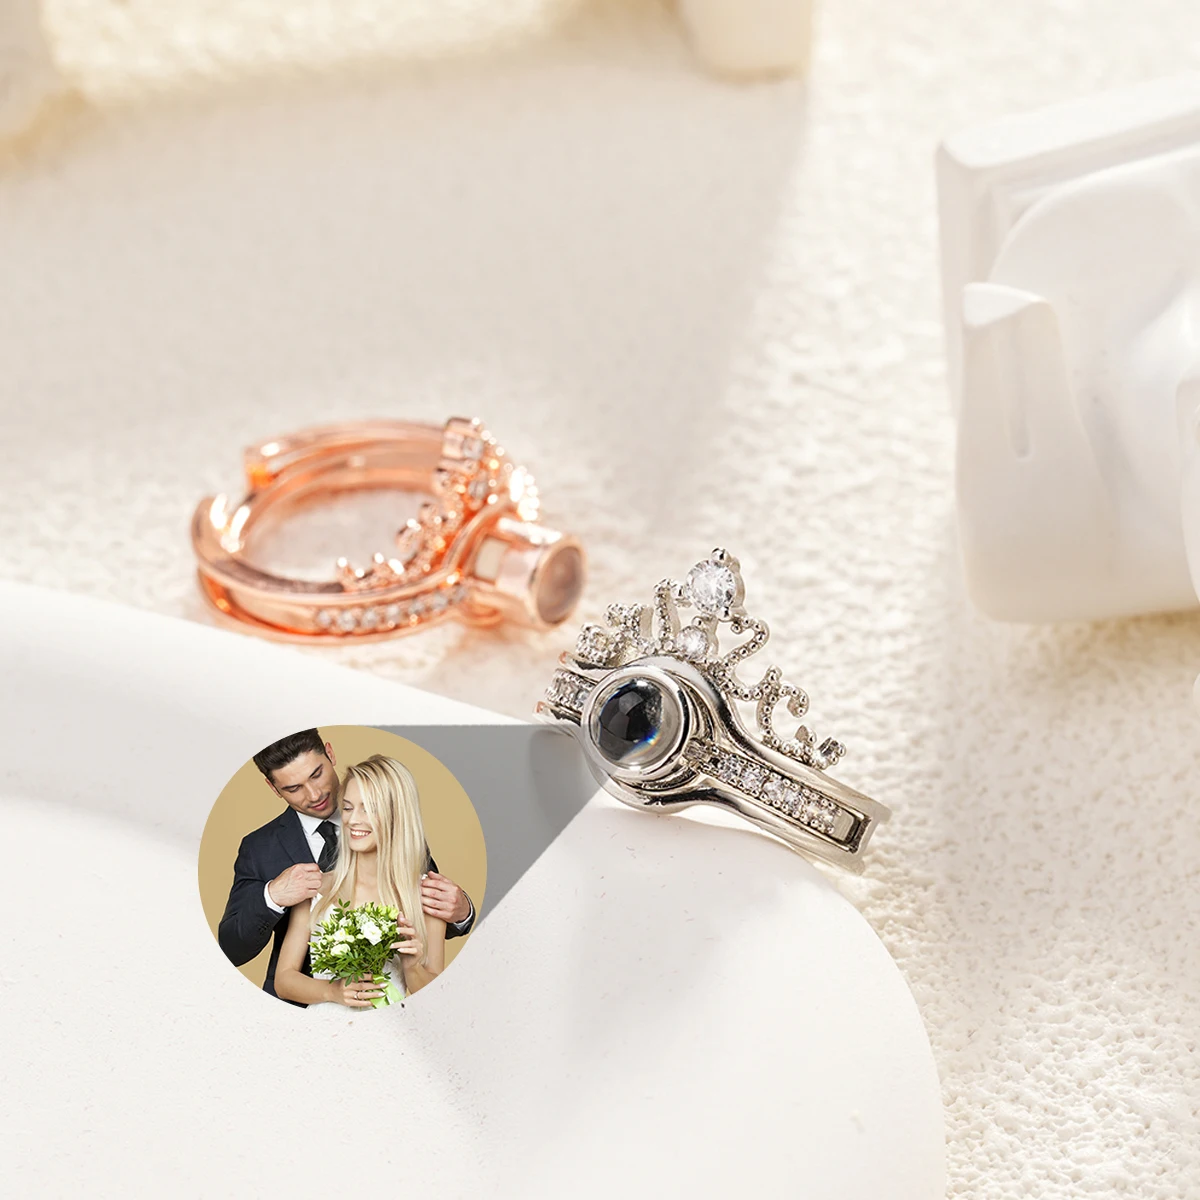 Crystal Crown Photo Custom Image Ring with Your Picture Family Memory Pet Personalized Projection Rings Valentine's Day Gift amxiu 925 sterling silver ring with birthstones custom five family names rings for women s gift large heart zircon flower rings